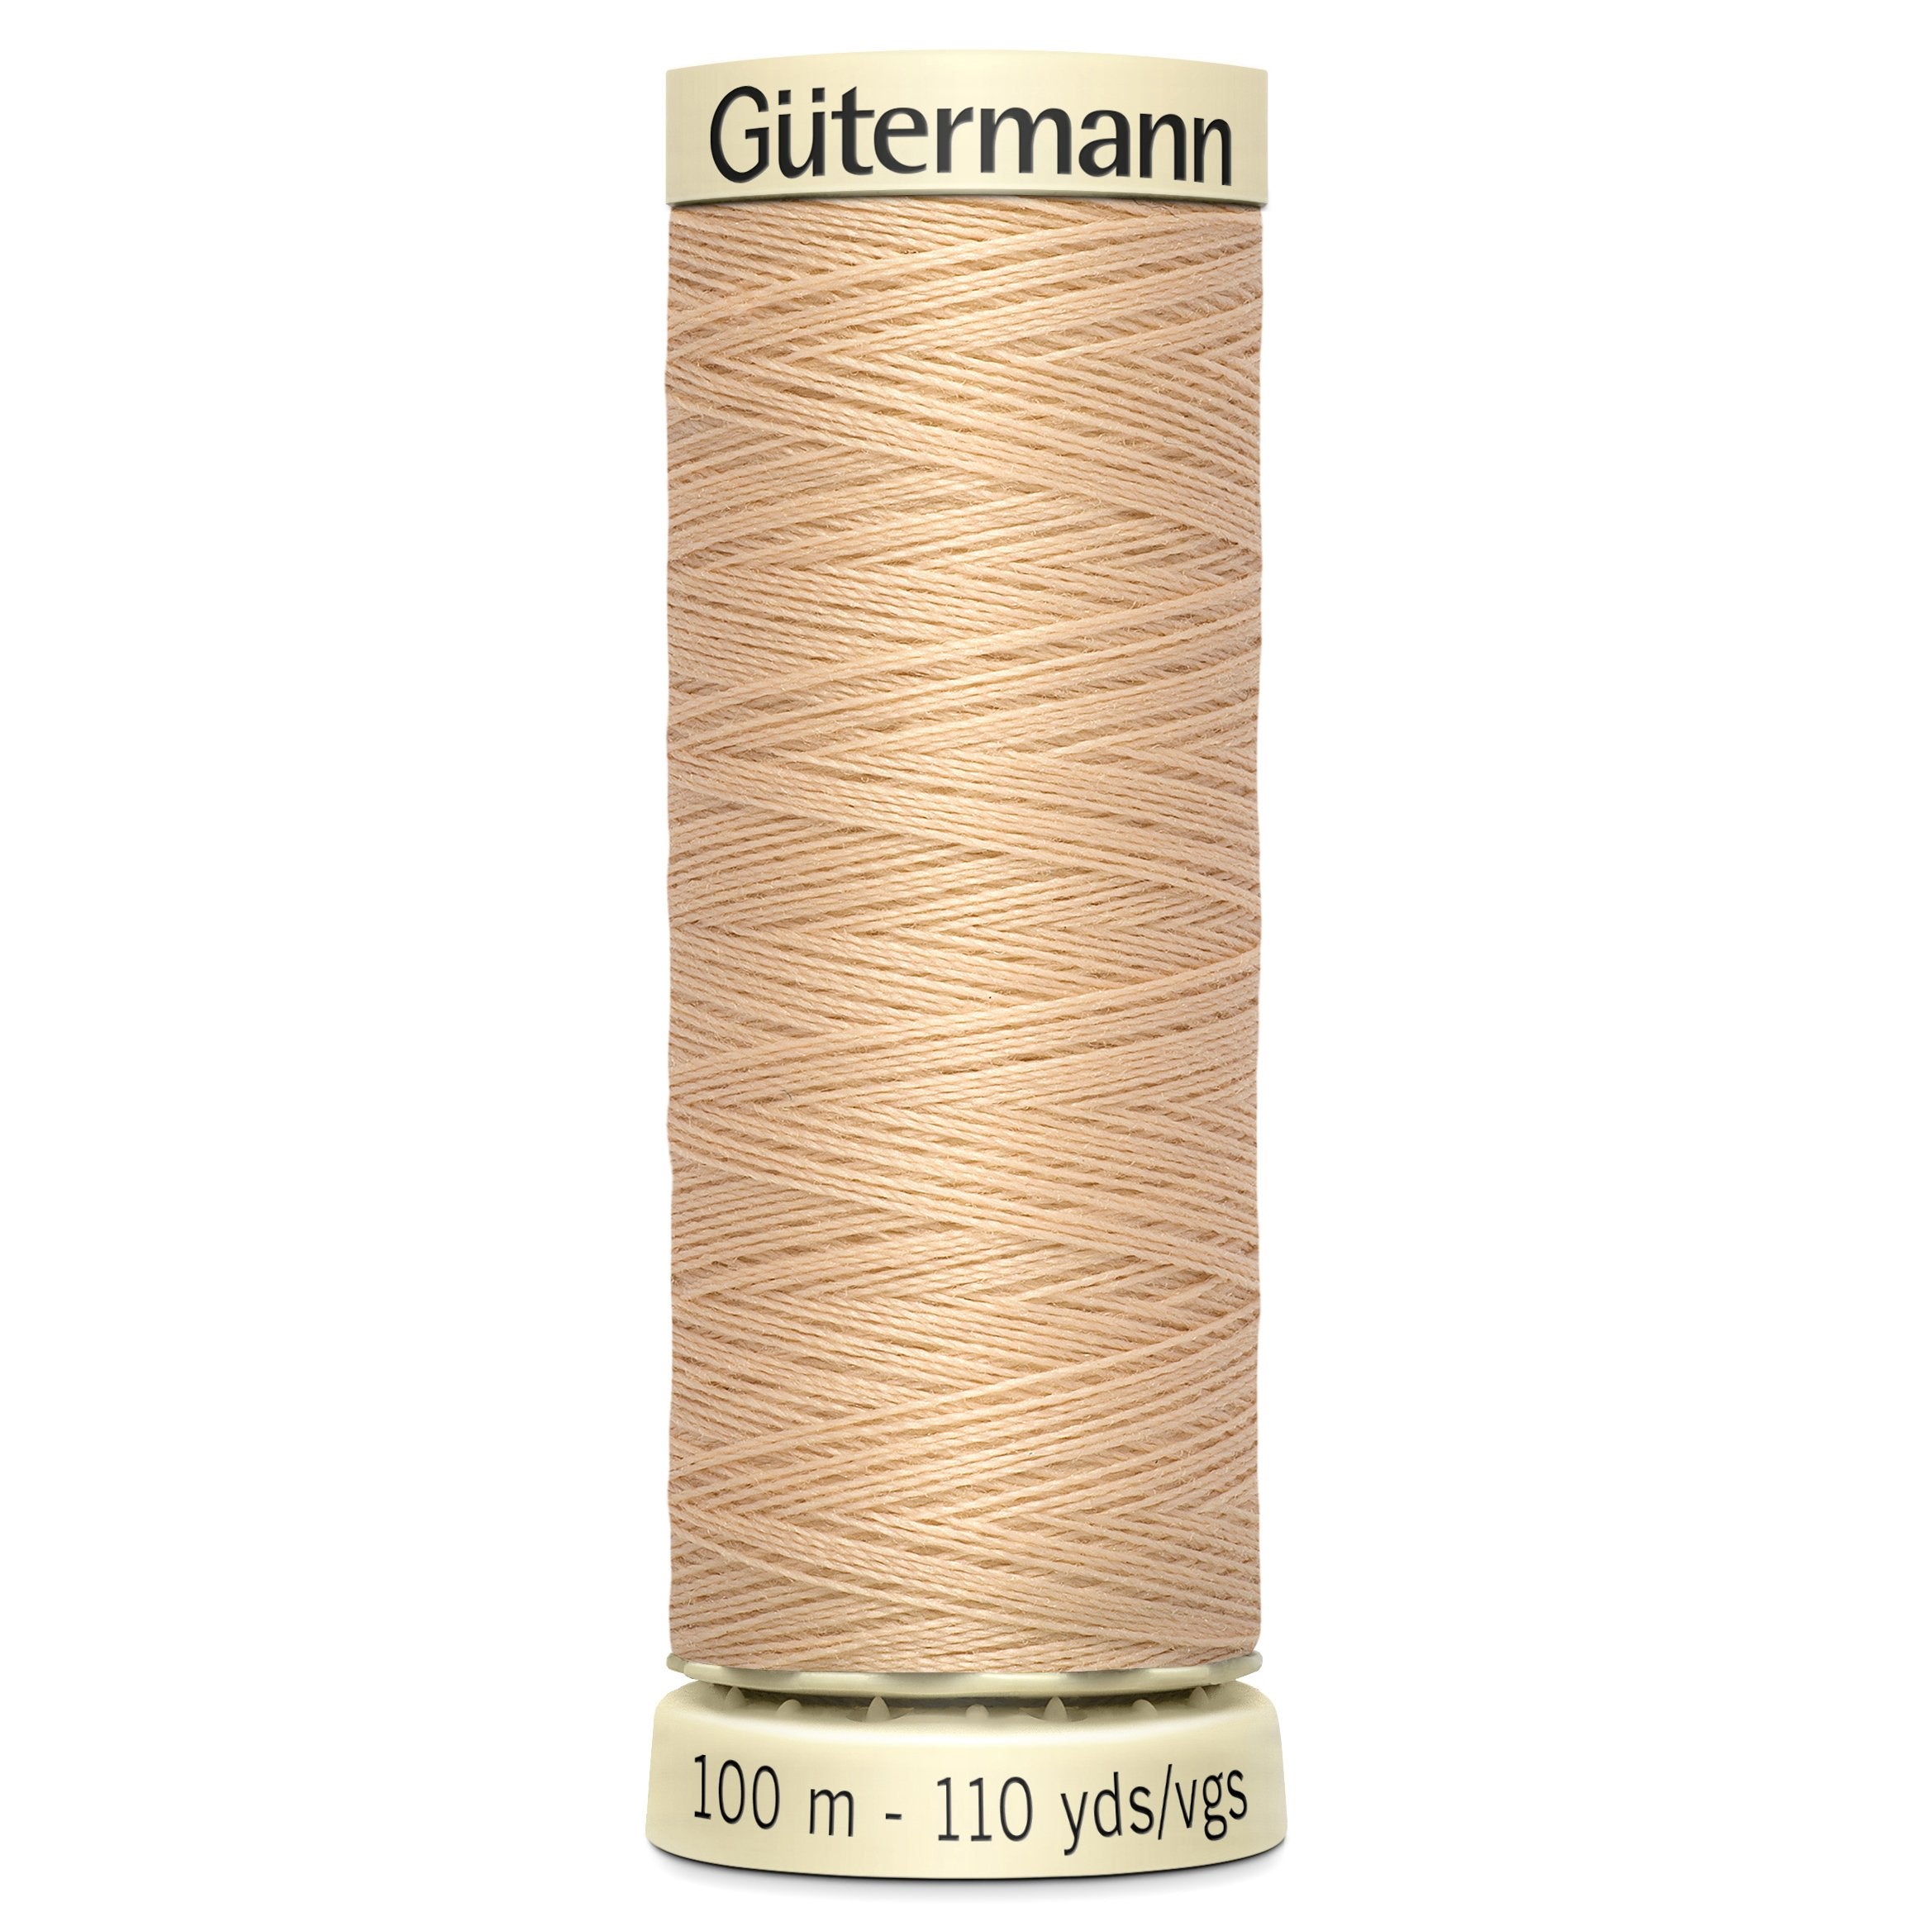 Gutermann Sew All Thread colour 421 Sand from Jaycotts Sewing Supplies